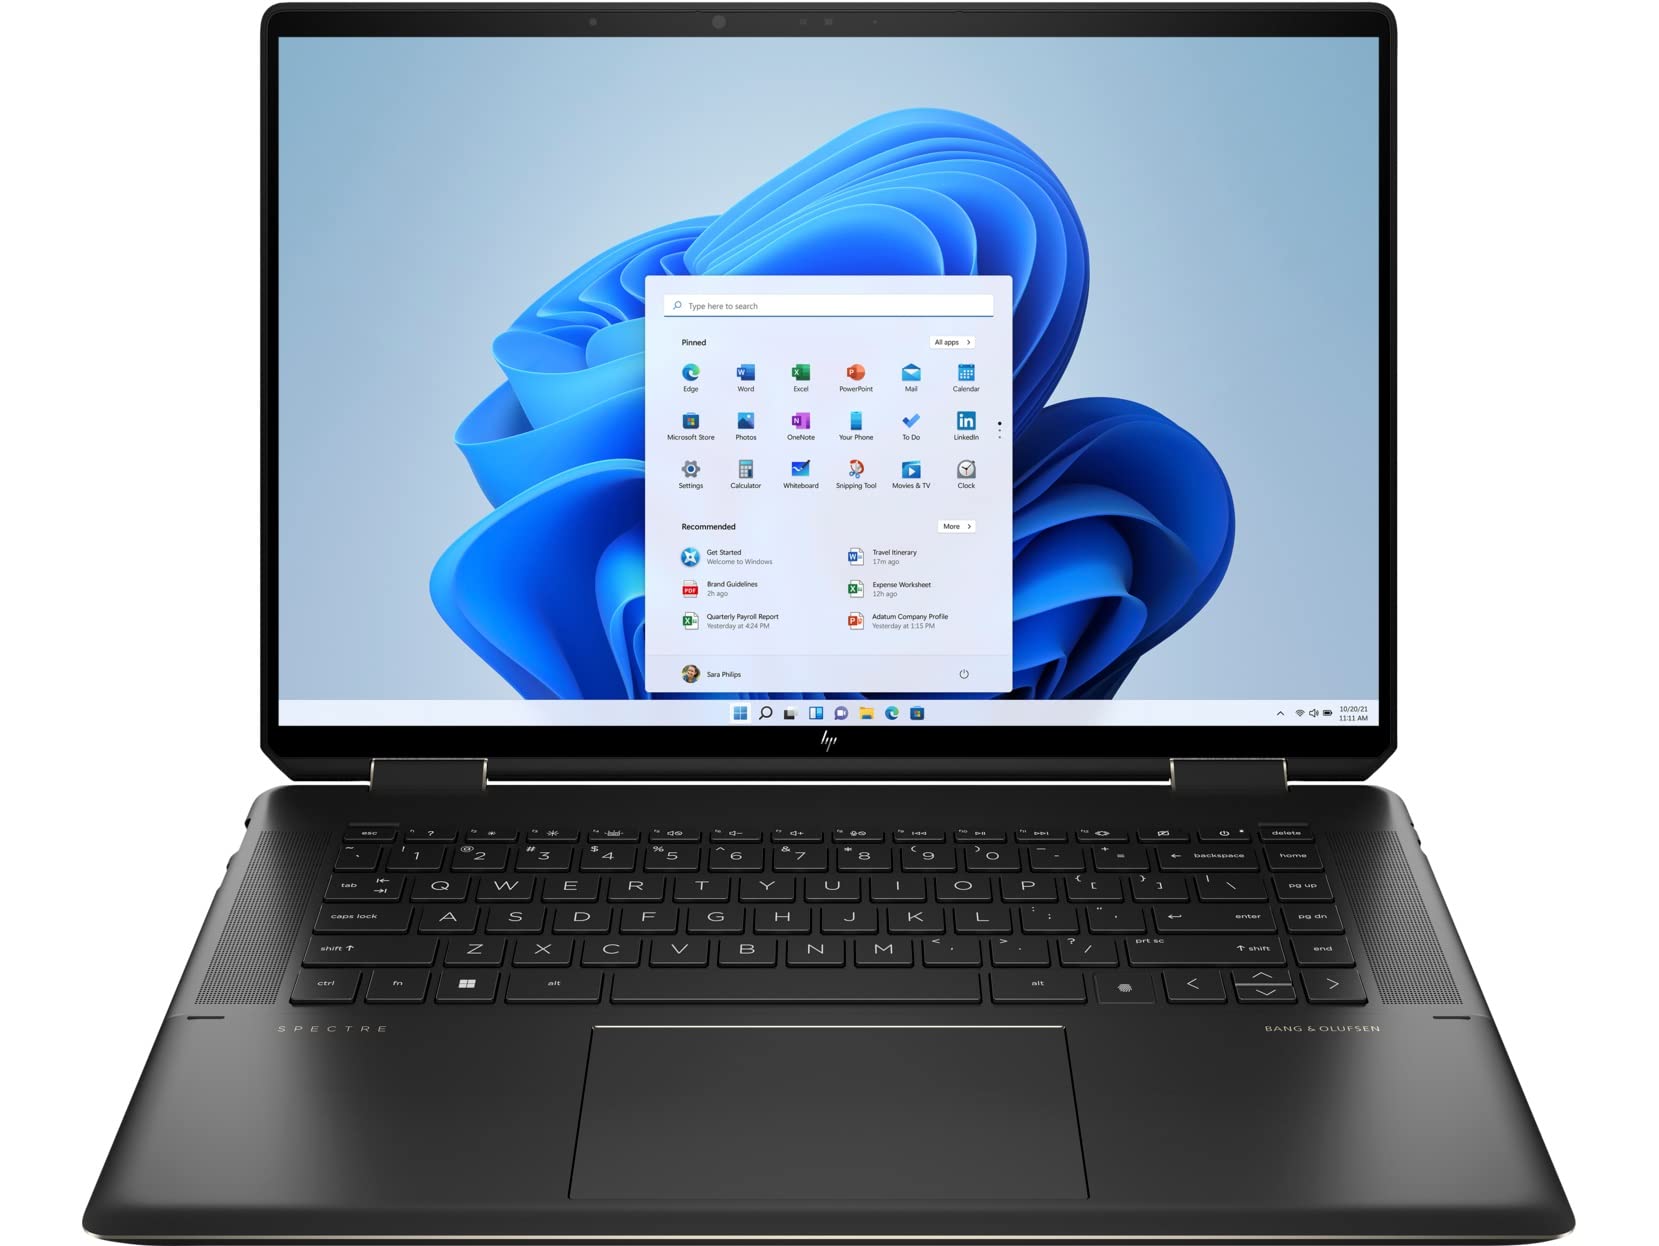 HP Spectre Touch x360 16 Premium 2-in-1 Laptop in Ash Intel i7-11390H Quad Core up to 5.0GHz 16GB RAM 1TB SSD 16in 3K+ Iris XE Graphics (16-EF000-Renewed)